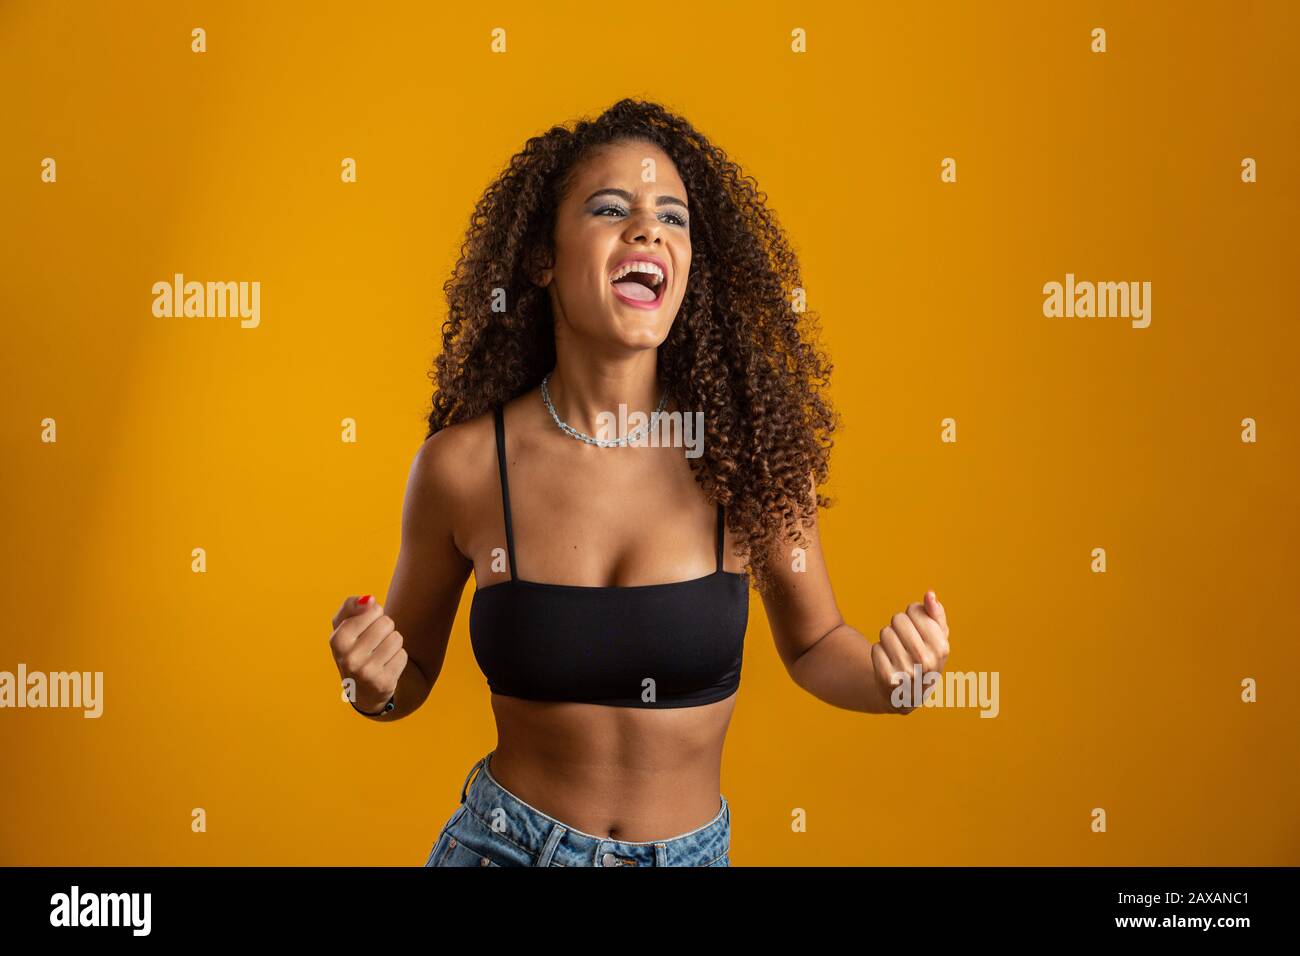 Overwhelmed excited smiling, happy afro curly hair girl celebrating amazing news, achieve victory, winning competition, gain goal or unexpected lucky Stock Photo